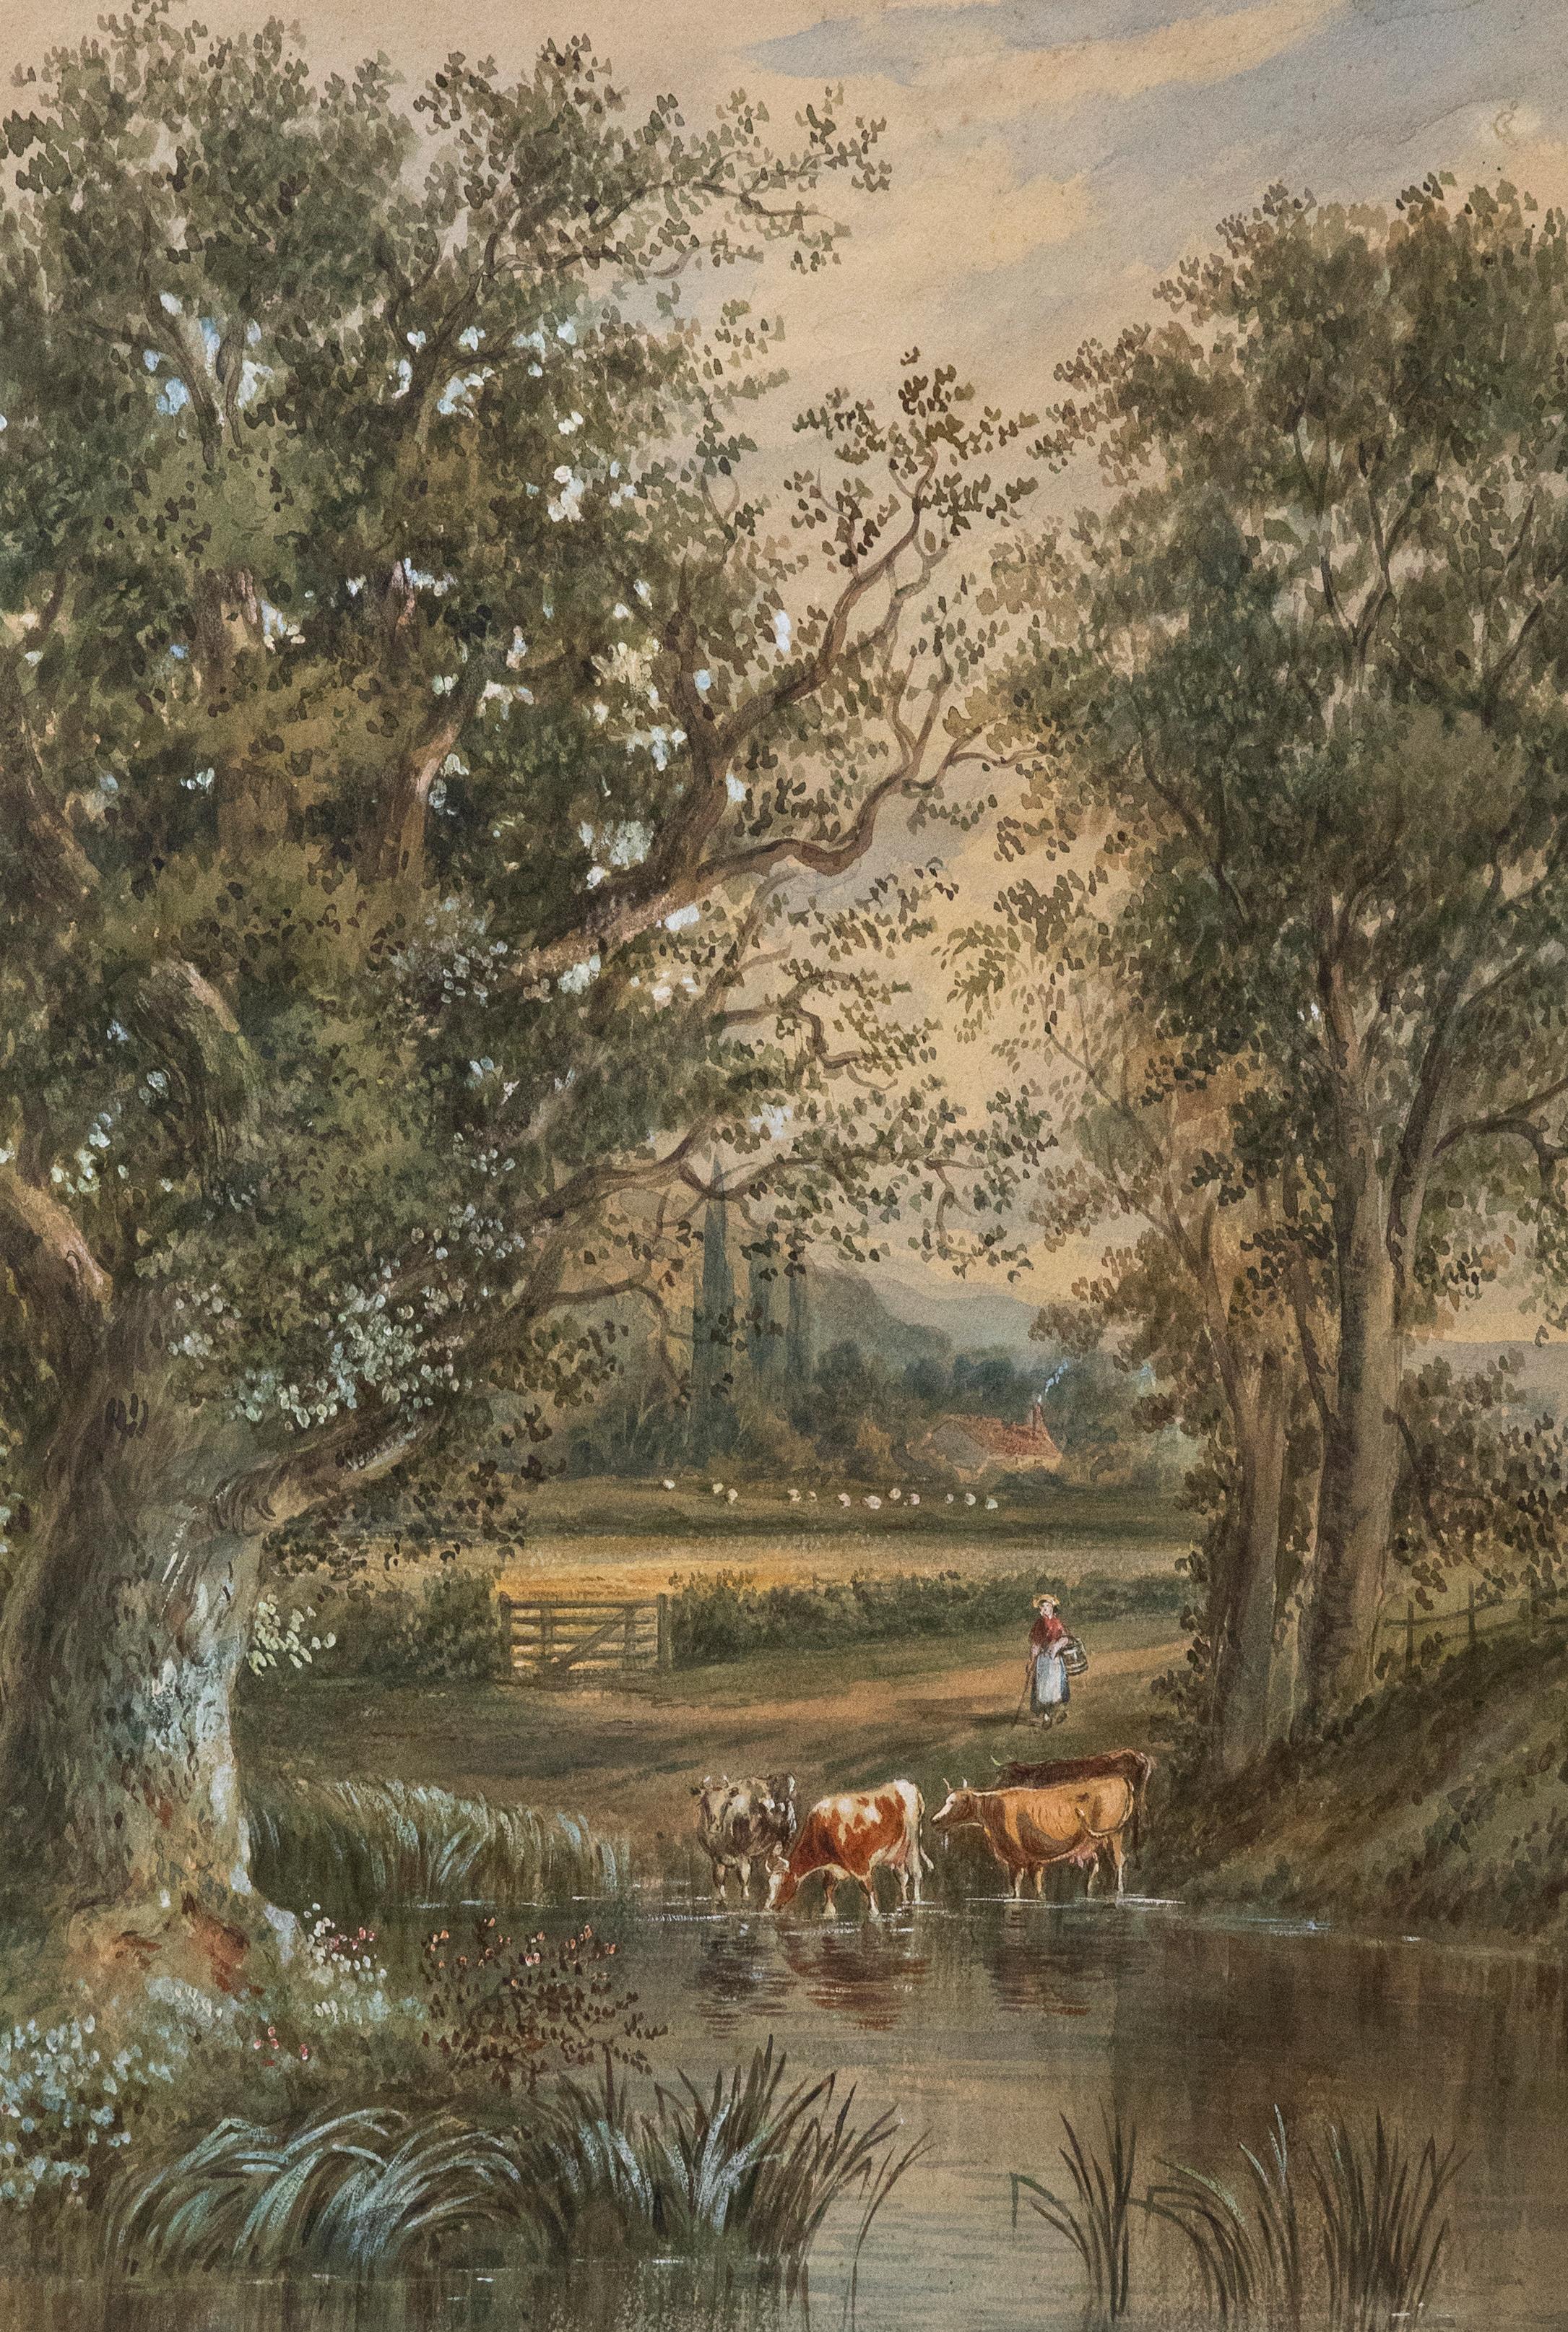 Unknown Landscape Art - Late 19th Century Watercolour - Milkmaid Amongst the Cattle